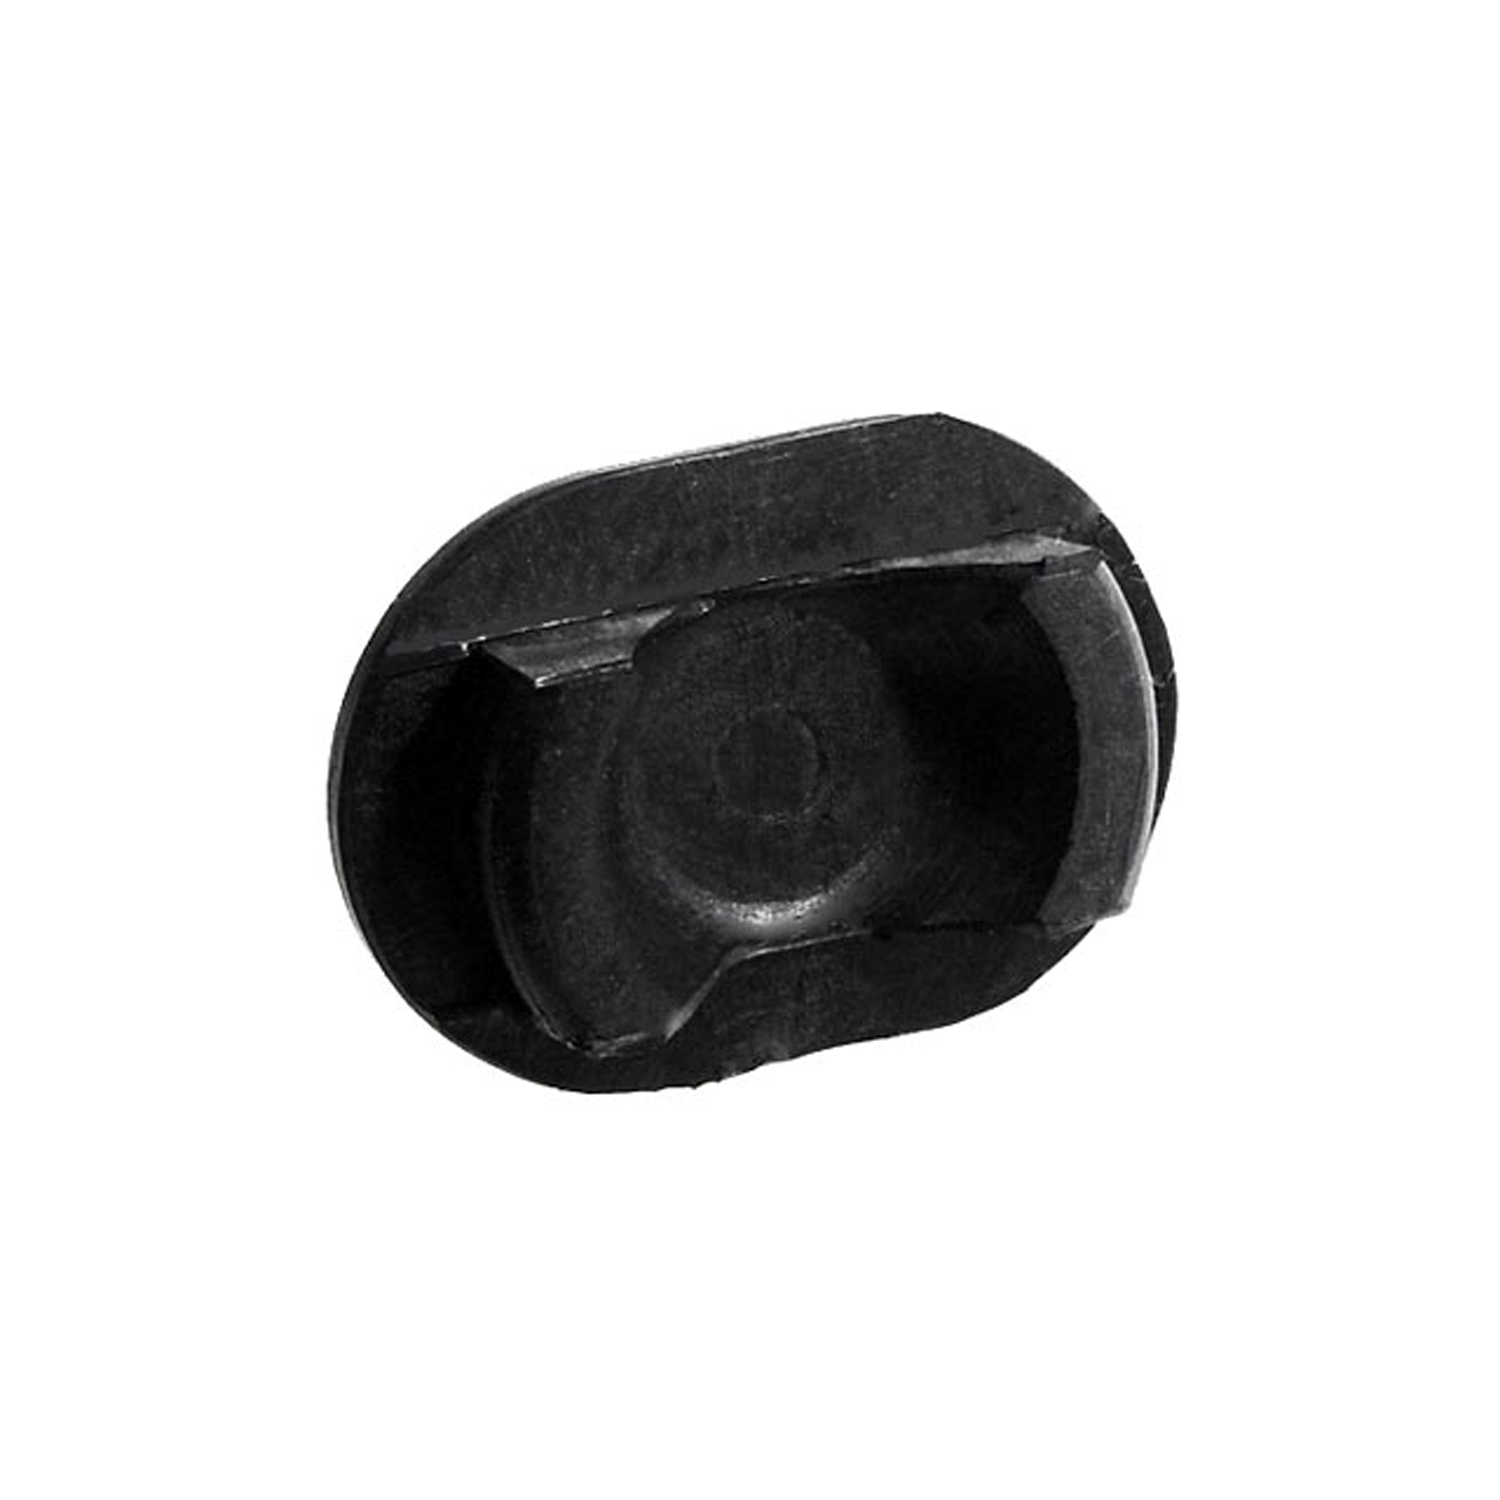 1970 Chevrolet El Camino Timing Hole Plug.  For 6-cylinder engines.  1-3/4 X 1-1/4-SM 59